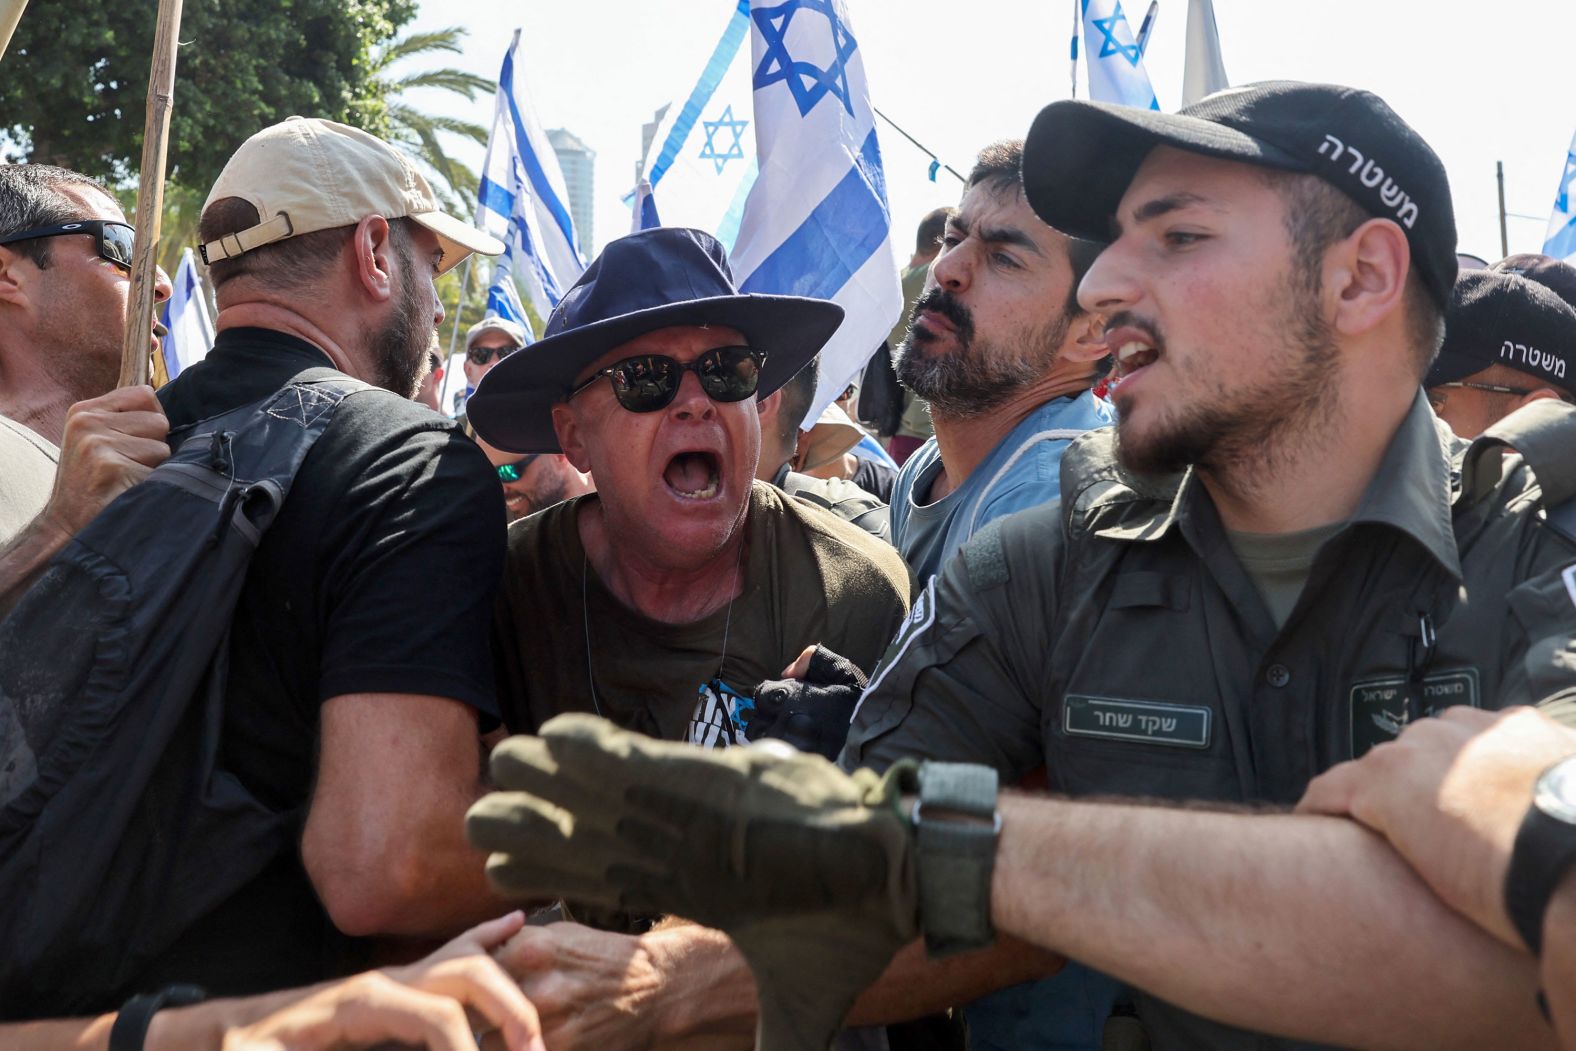 Members of Israel's security forces scuffle with demonstrators in Tel Aviv on July 18.